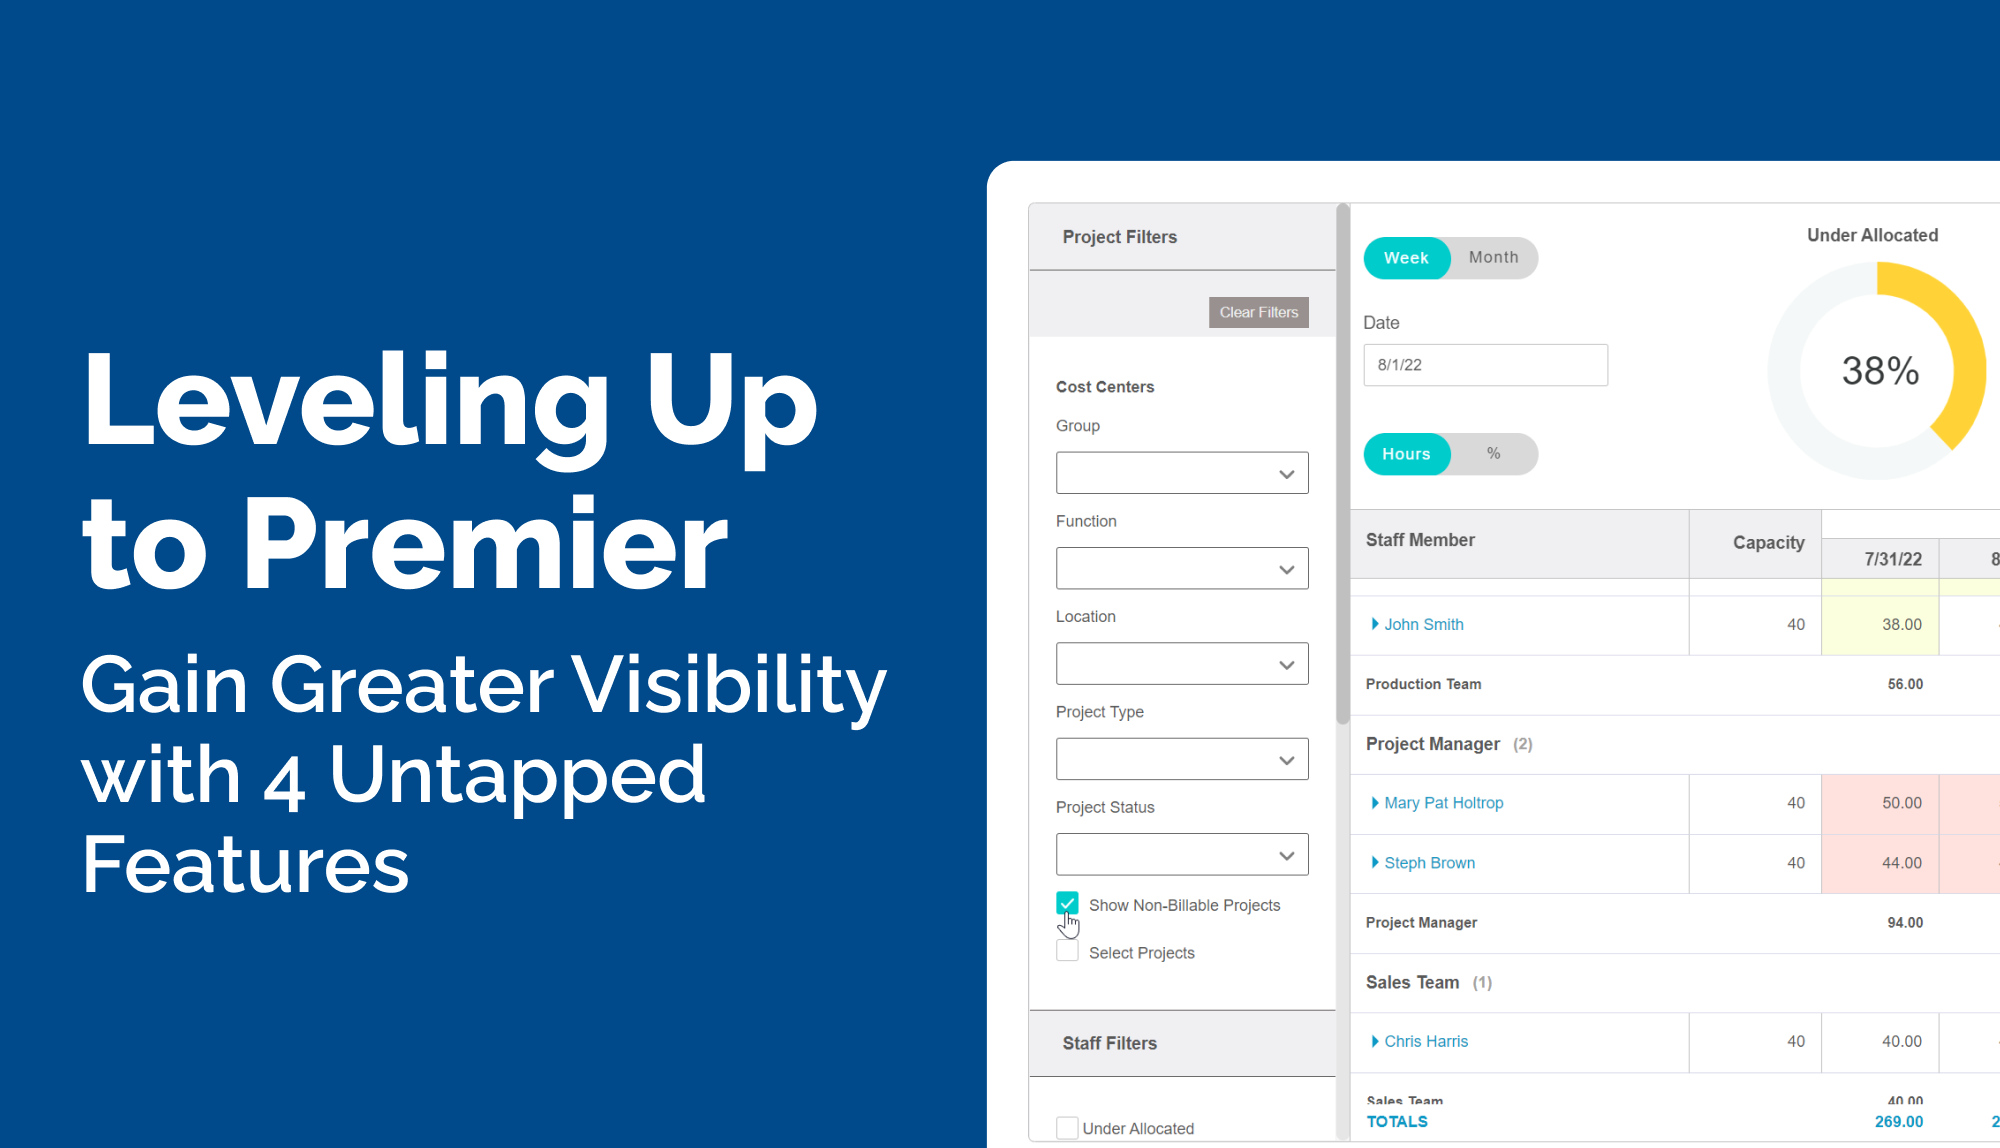 Leveling Up to Premier: Gain Greater Visibility with 4 Untapped Features